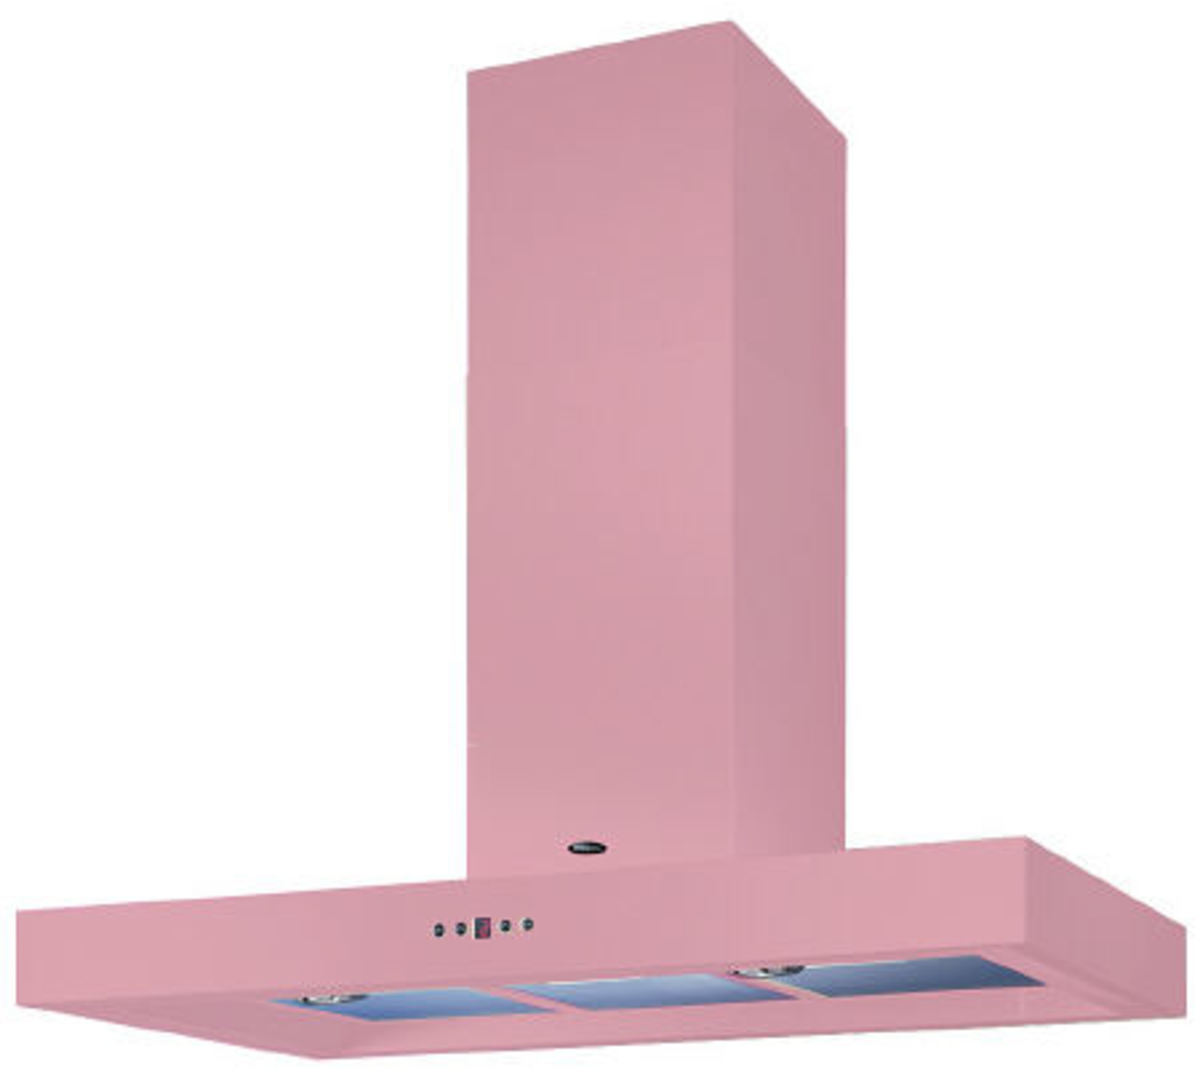 10-stylish-options-for-cool-kitchen-cooker-hoods